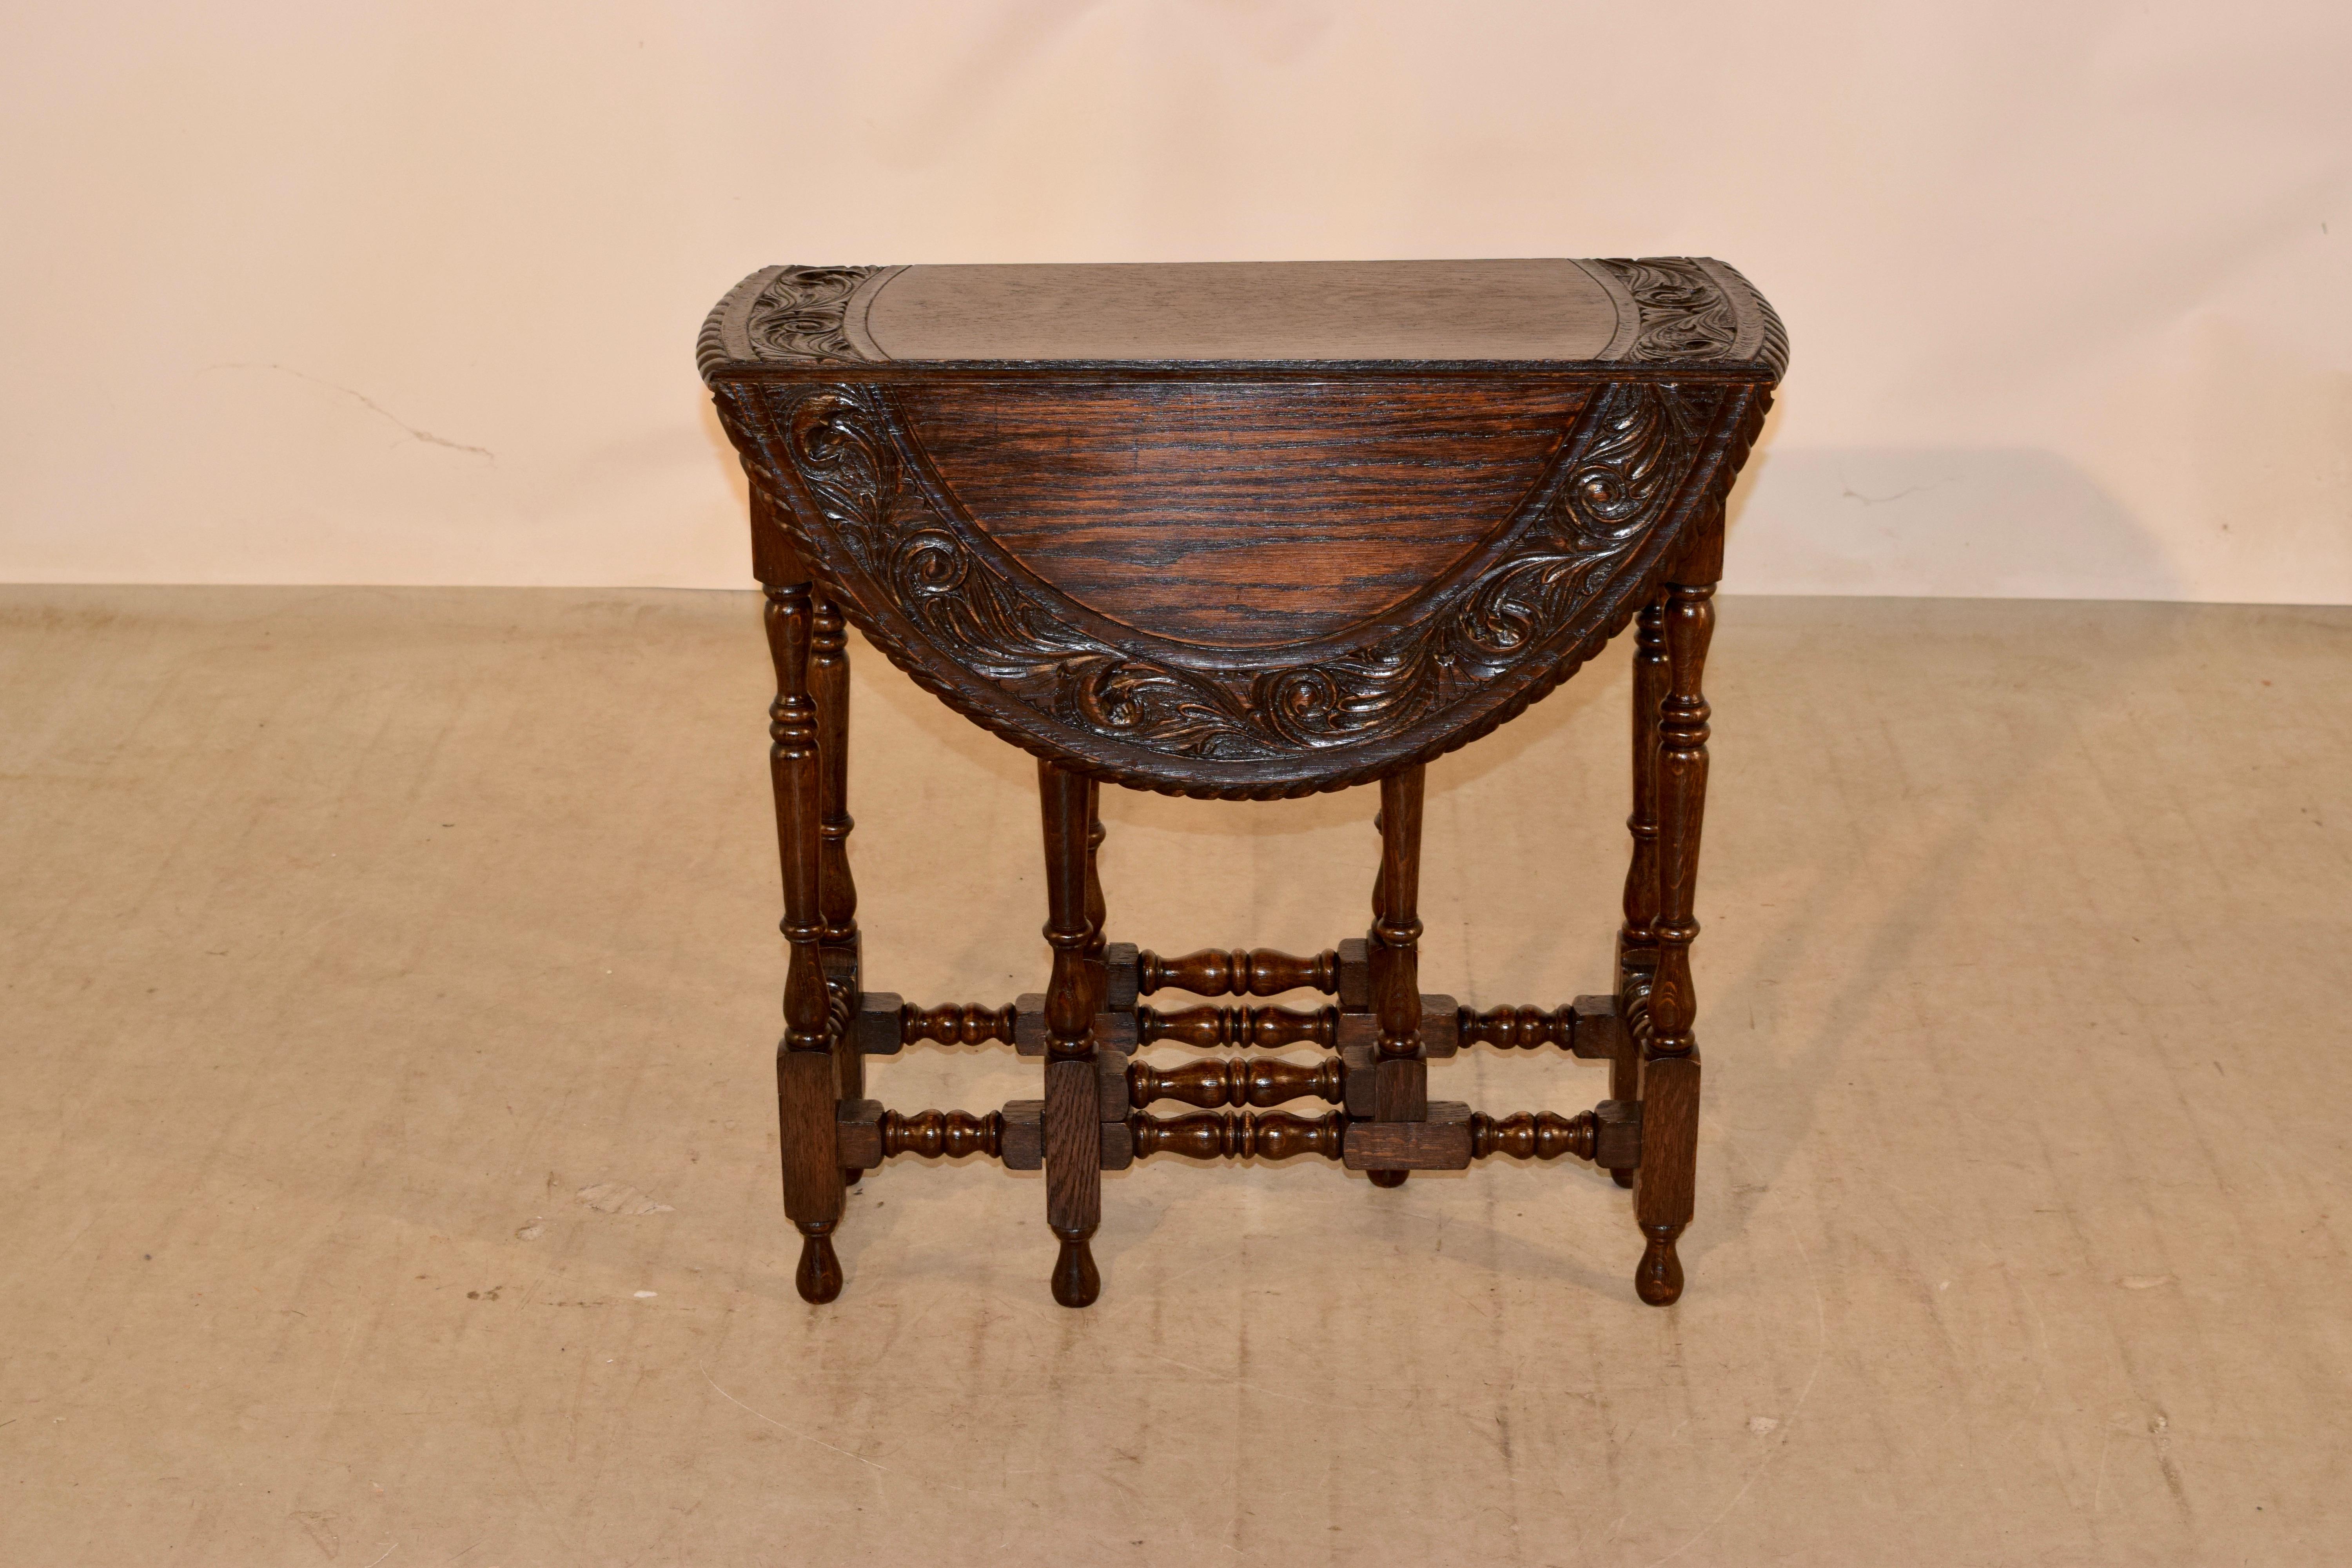 19th century oak gate leg from England with a carved and beveled edge surrounding the carved banded top. The apron is scalloped on the ends and the table is supported on hand turned legs, joined by turned stretchers and raised on hand turned feet.